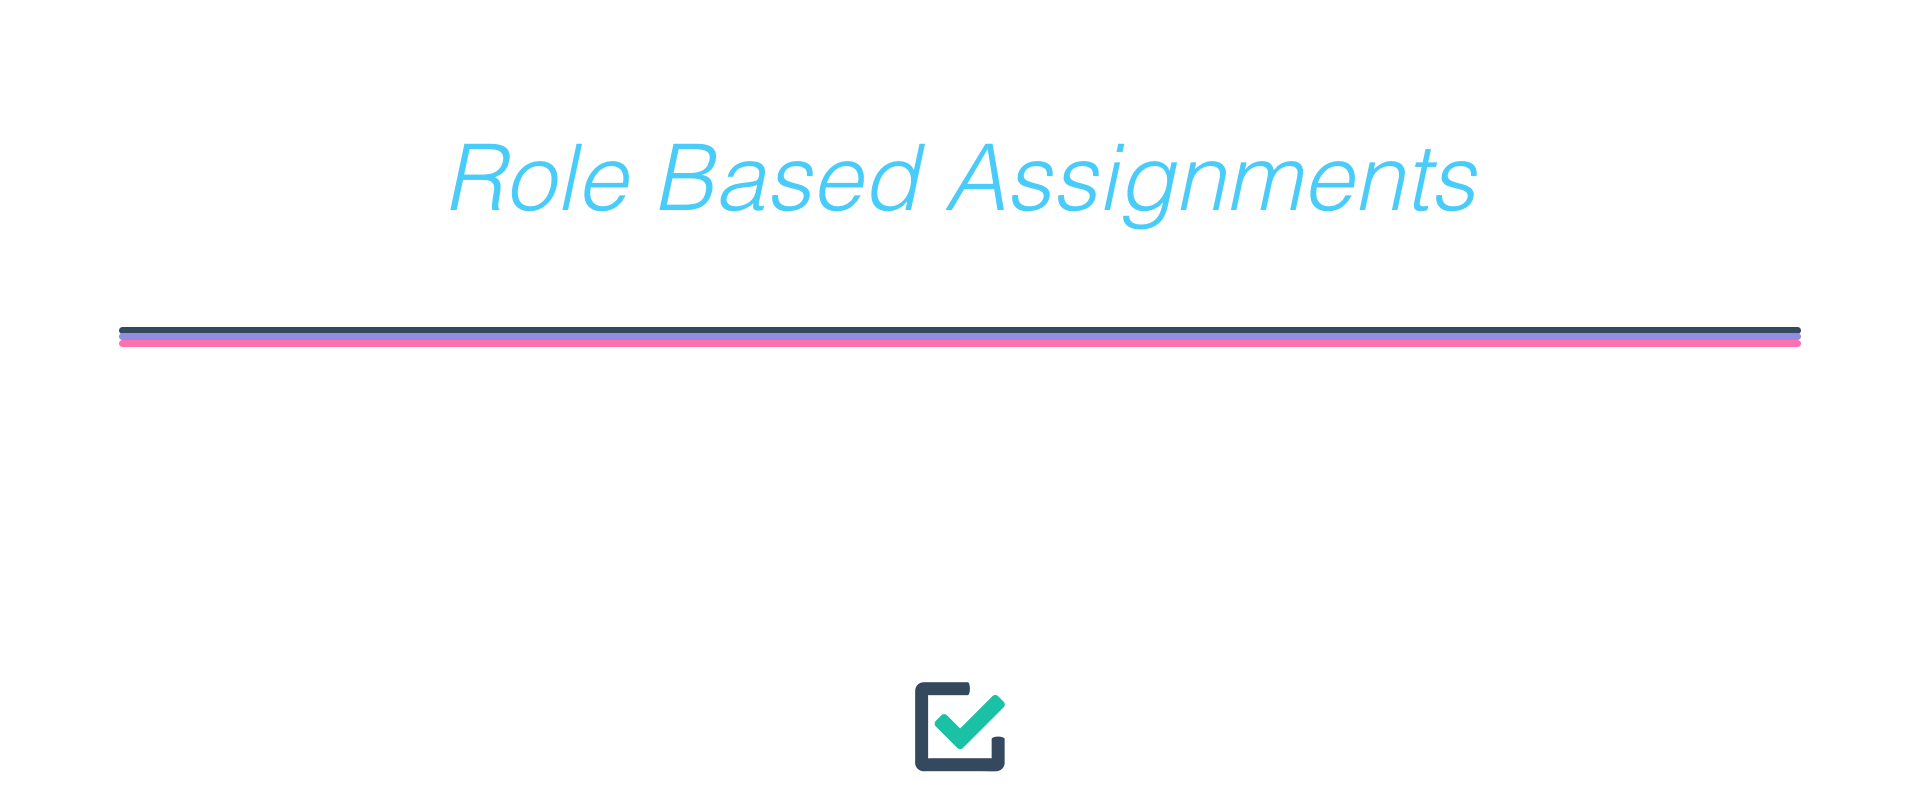 Role based assignments